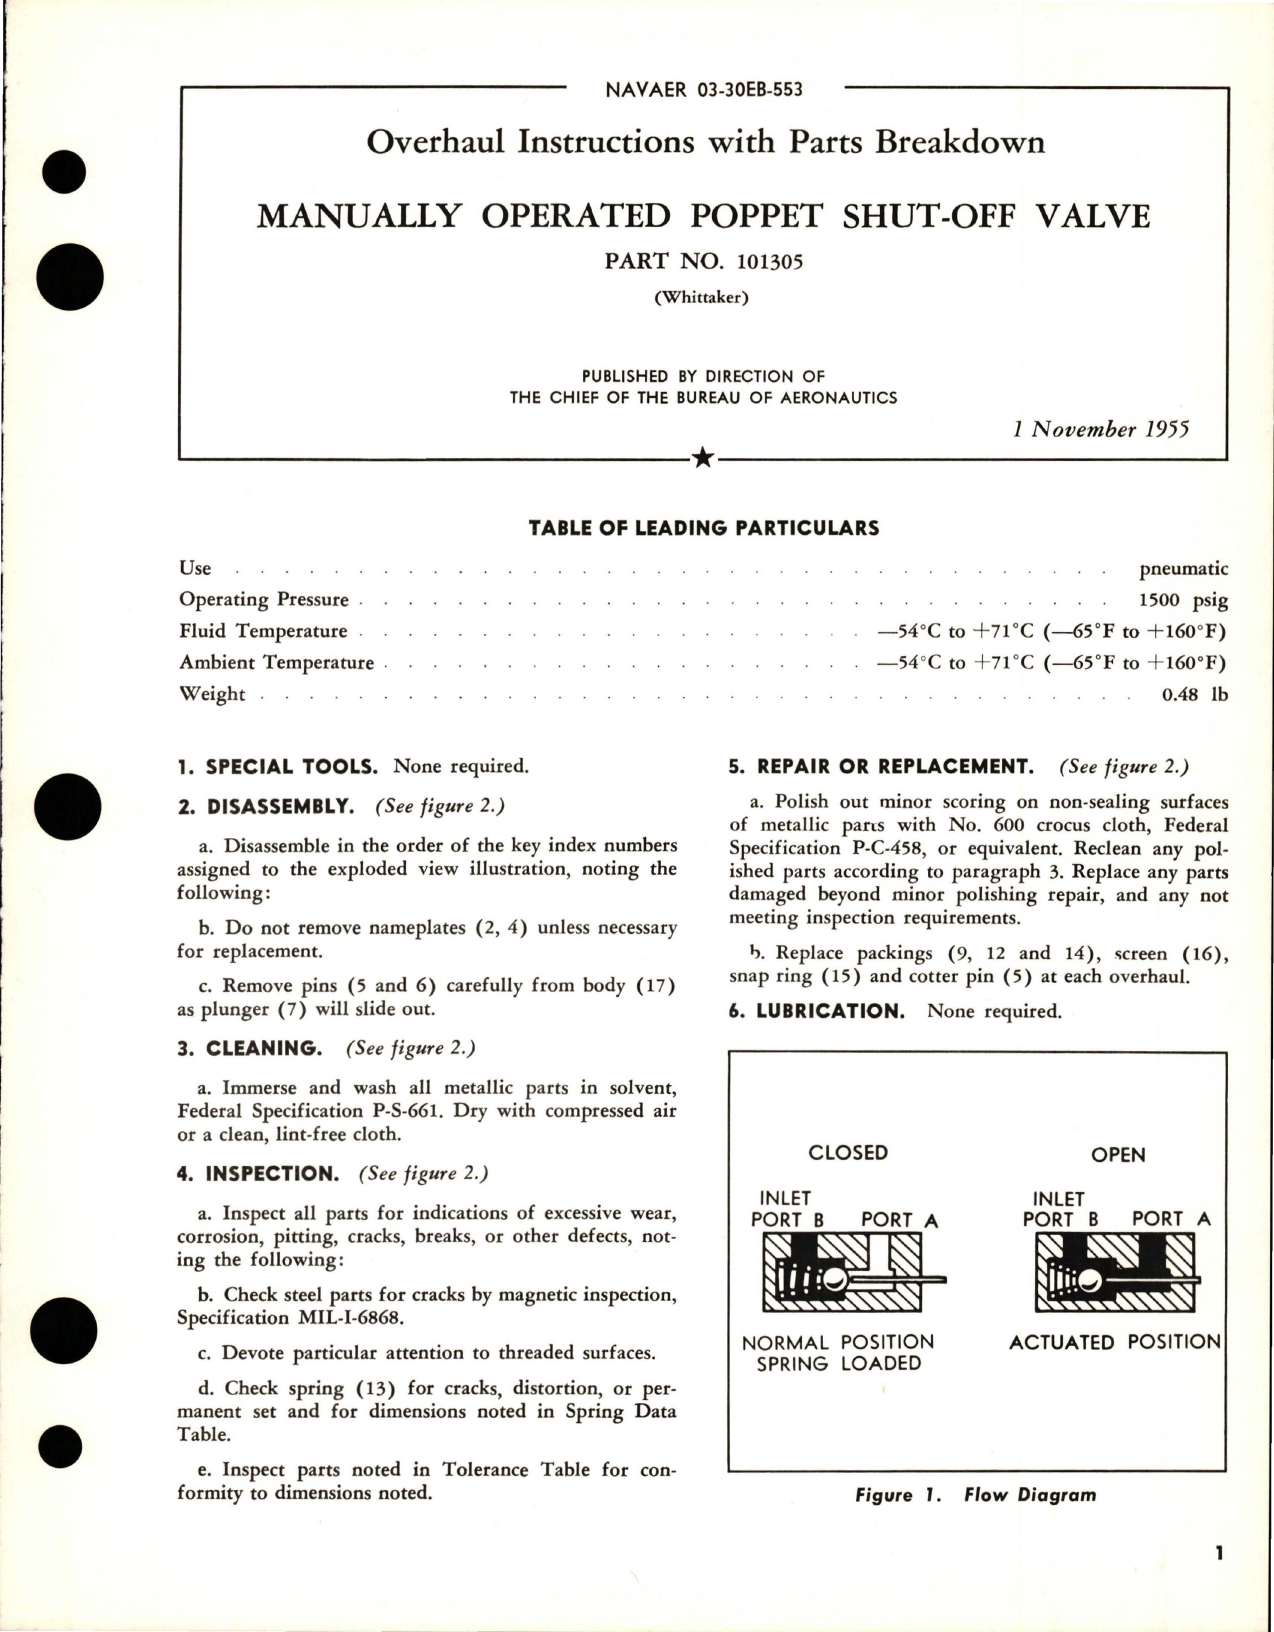 Sample page 1 from AirCorps Library document: Overhaul Instructions with Parts for Manually Operated Poppet Shut Off Valve - Part 101305